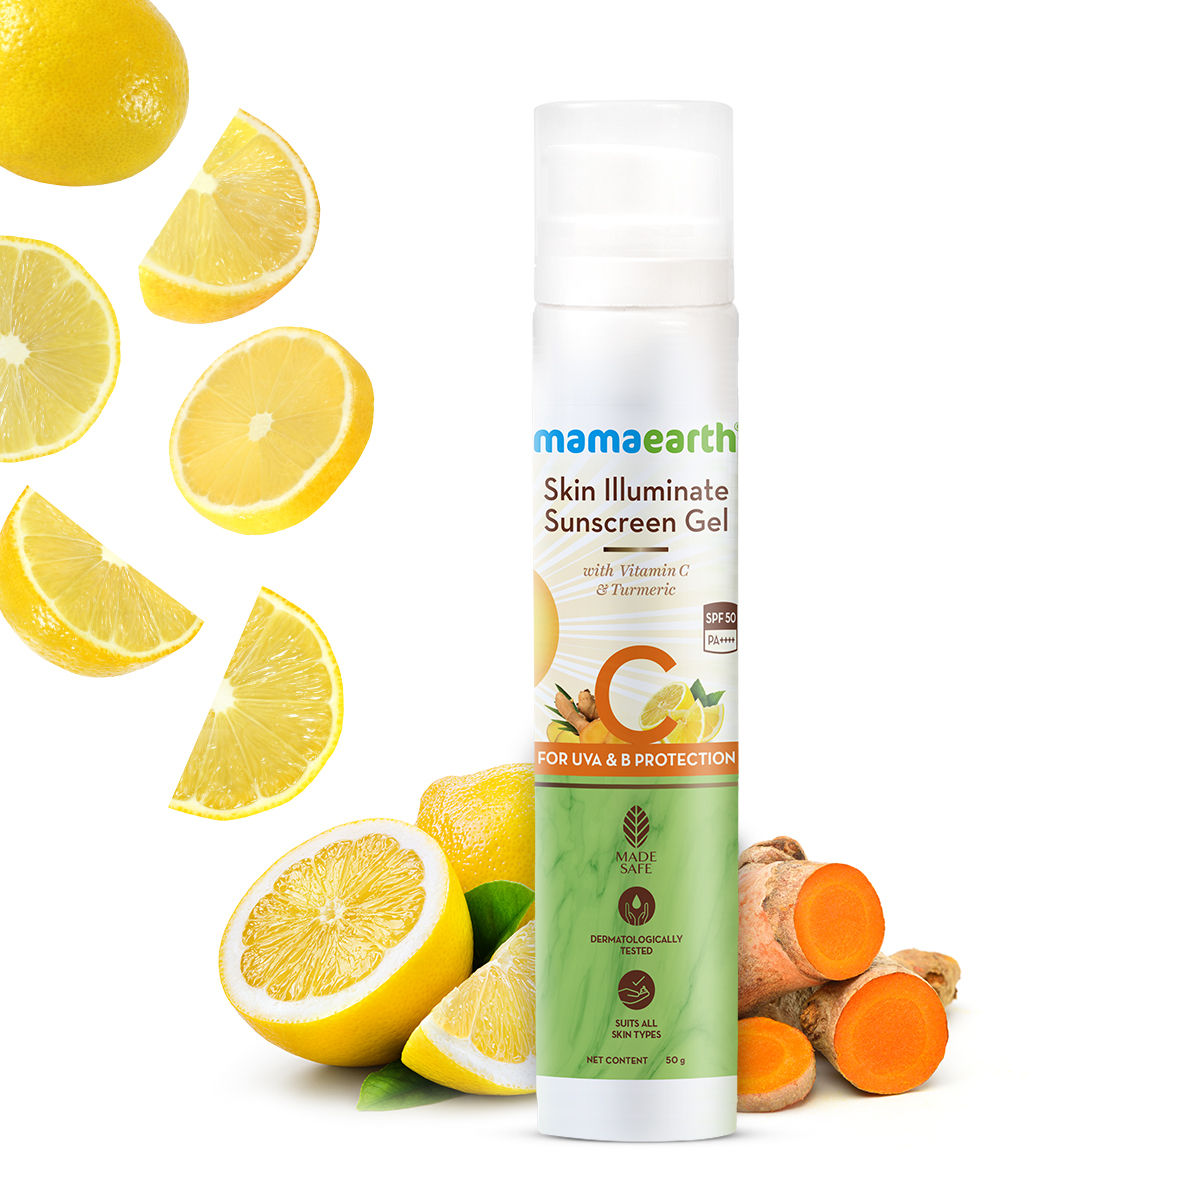 Buy Mamaearth Skin Illuminate Sunscreen with SPF 50 Gel with Vitamin C & Turmeric for UVA & B Protection, Pa+++ -(50 g) - Purplle